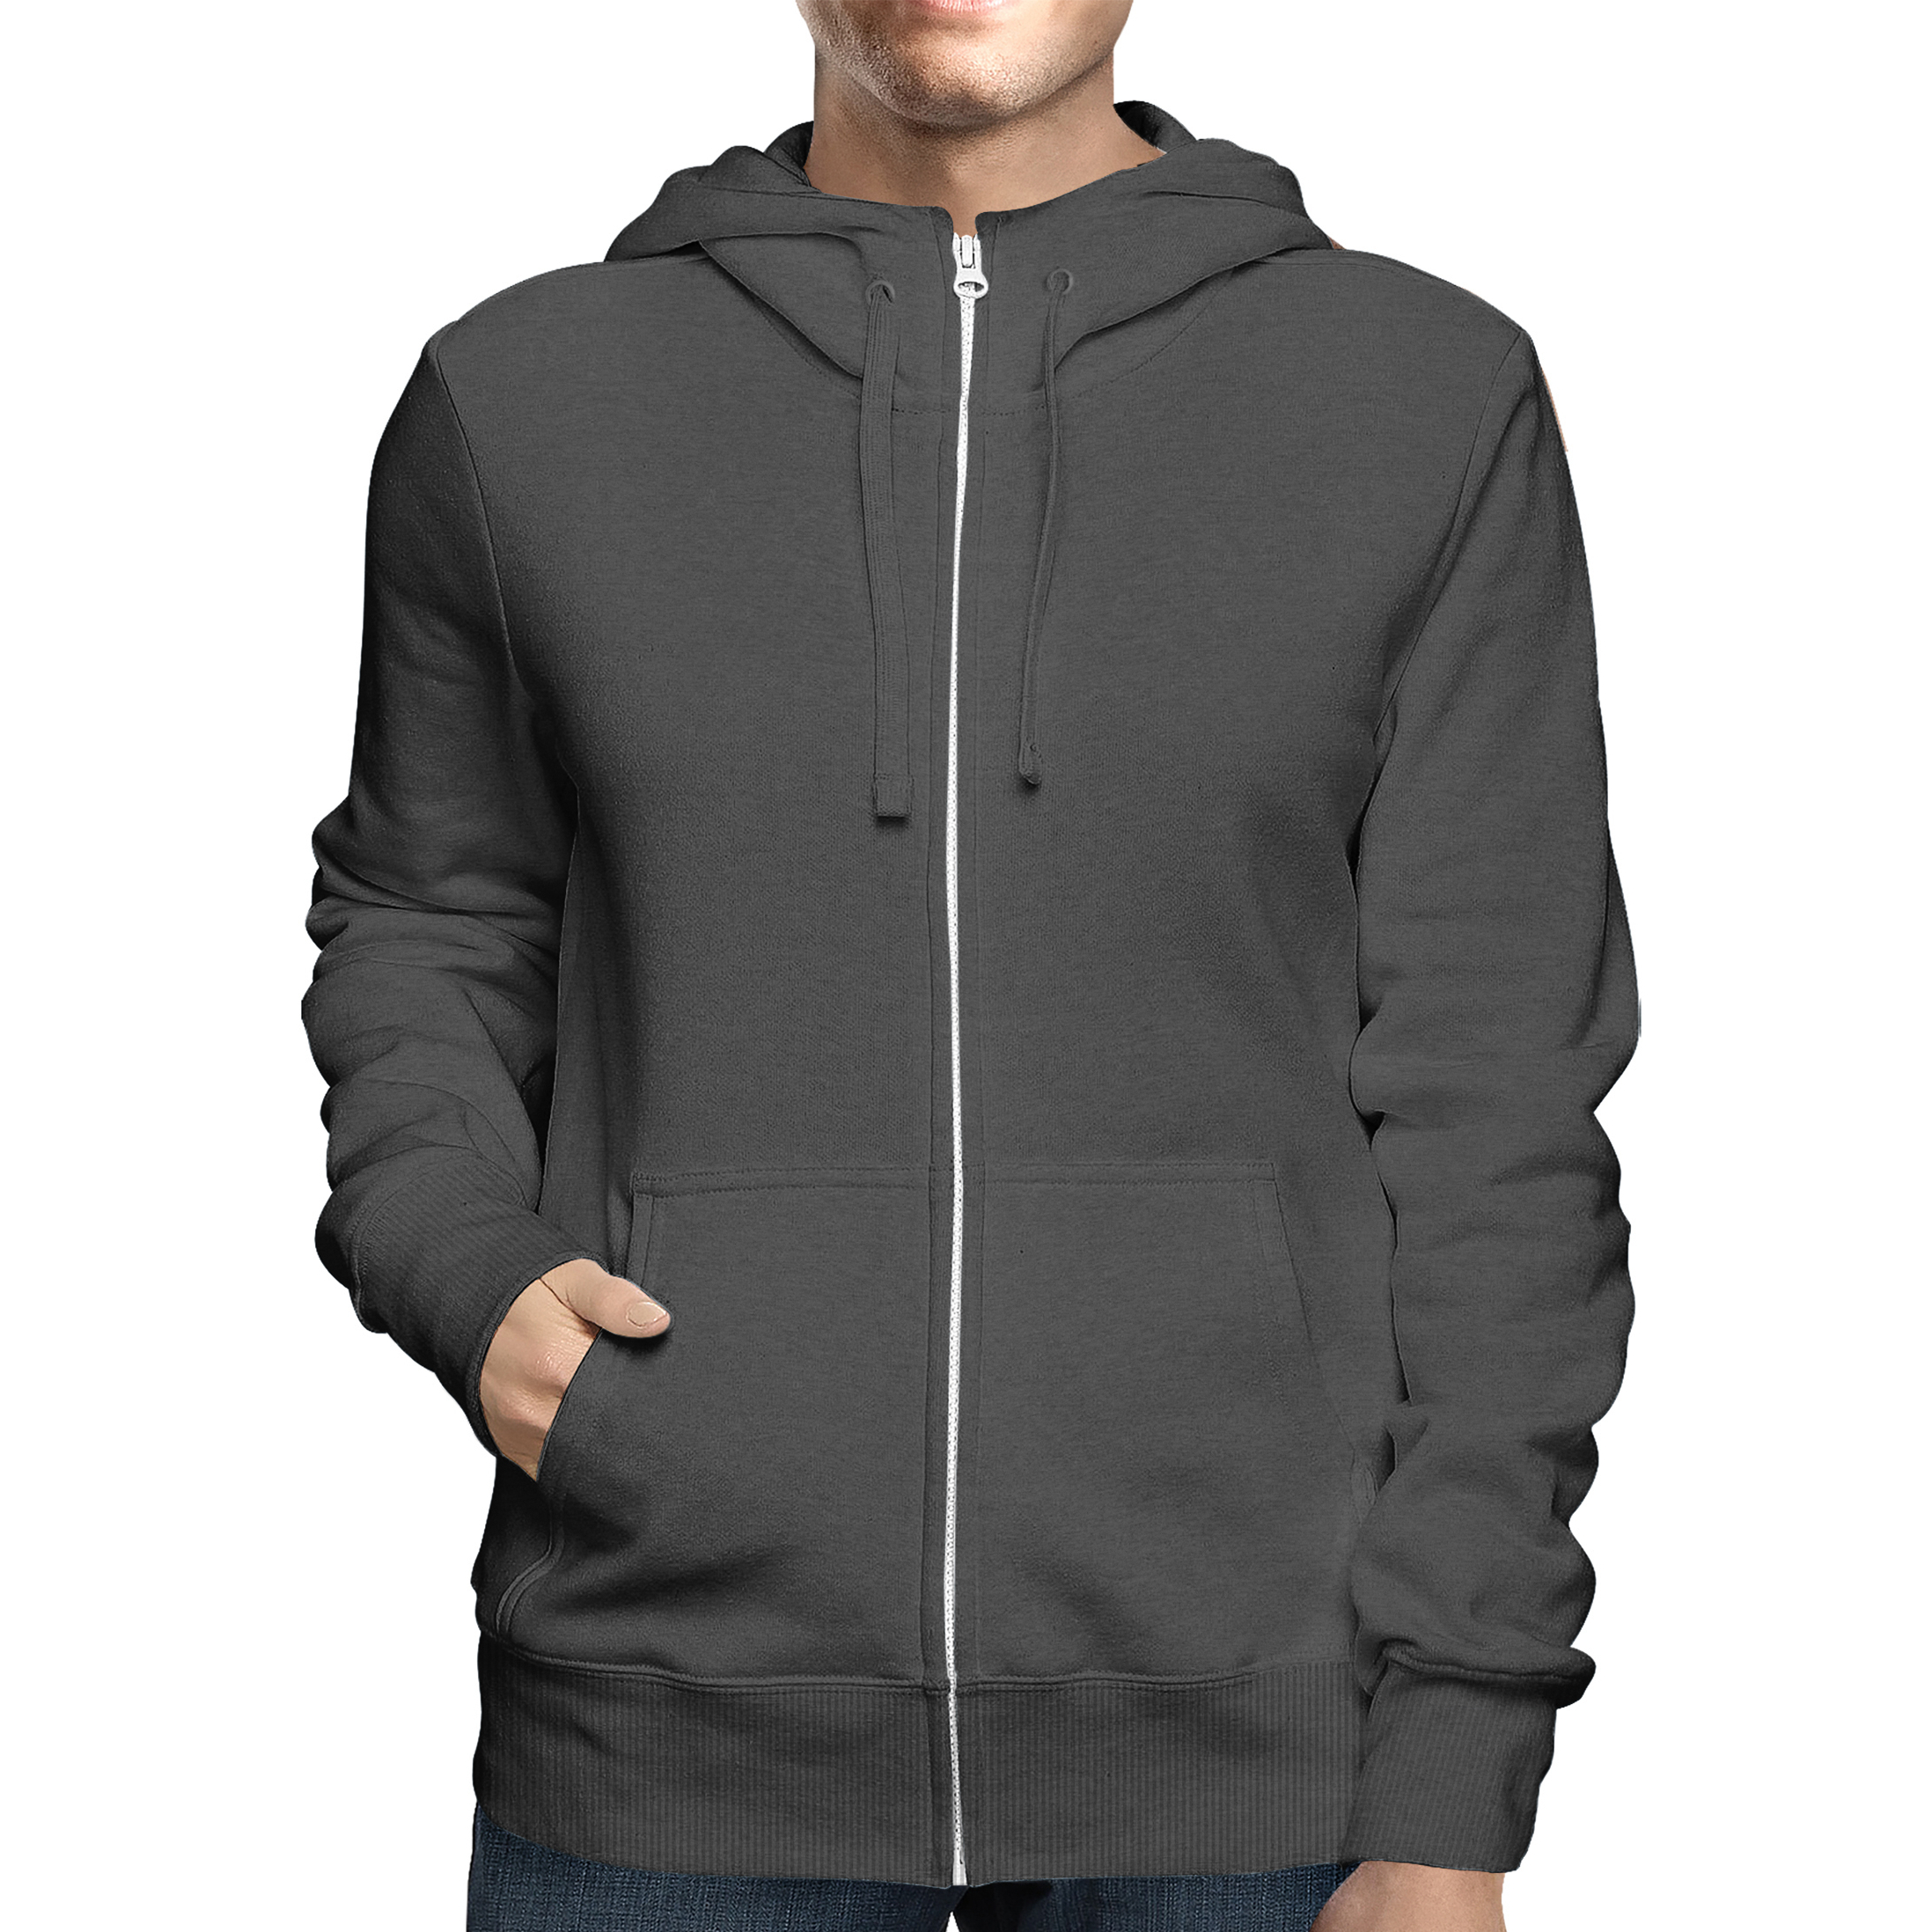 2-Pack: Men's Full Zip Up Fleece-Lined Hoodie Sweatshirt (Big & Tall Size Available) - Charcoal, 3x-large